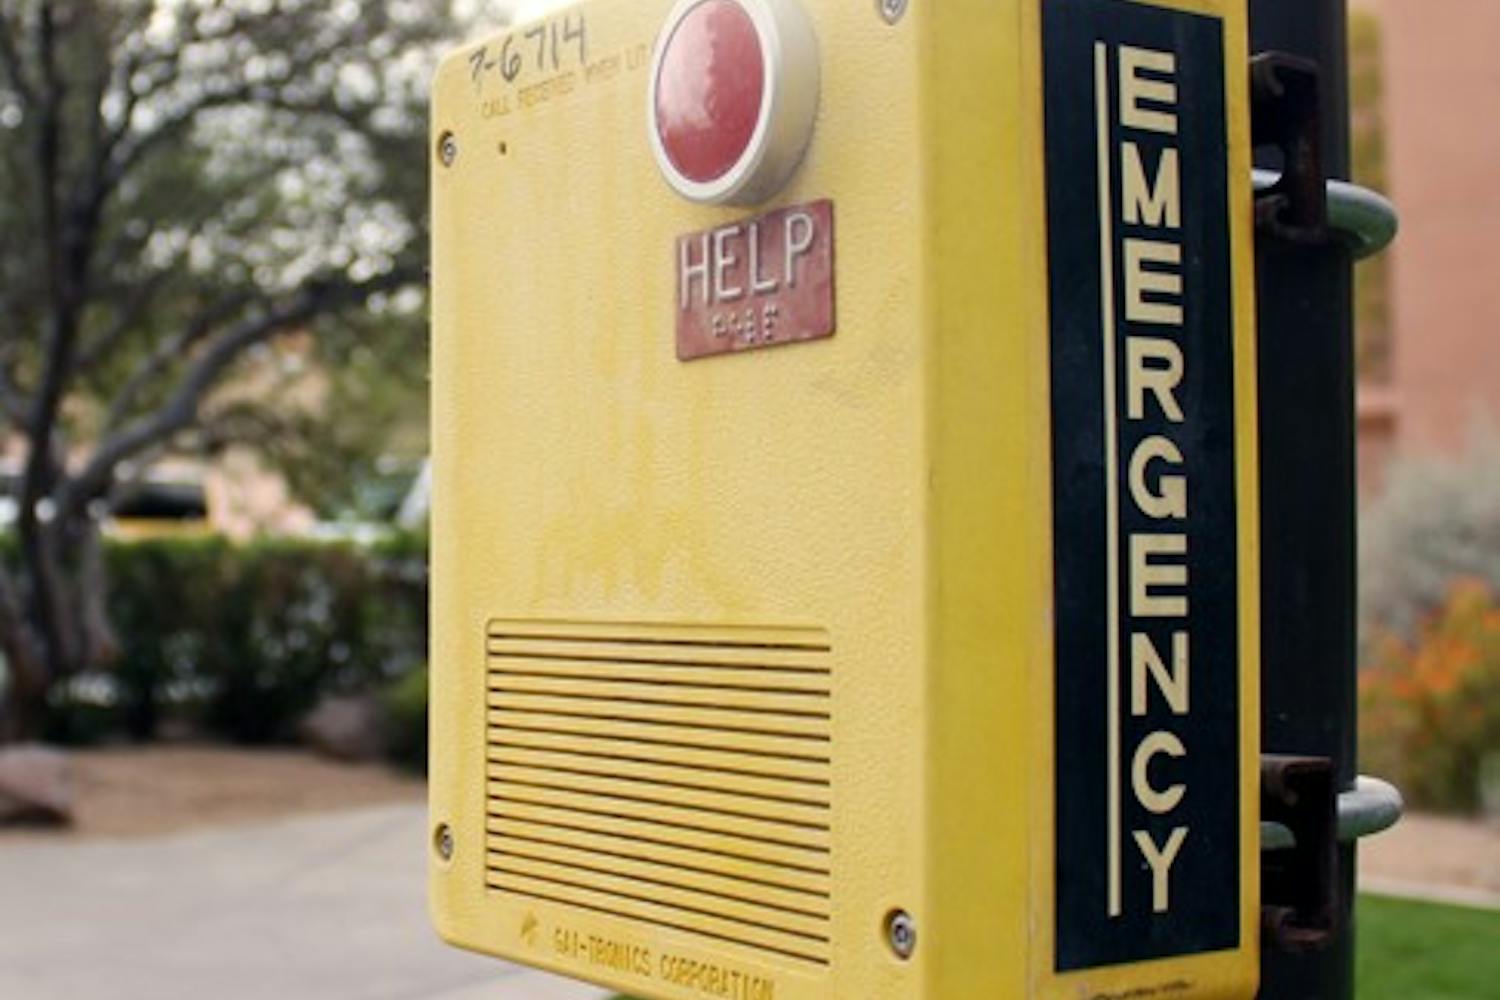 The use of emergency call boxes has decreased among students as cell phone usage has increased in the past few years. (Photo by Jenn Allen)